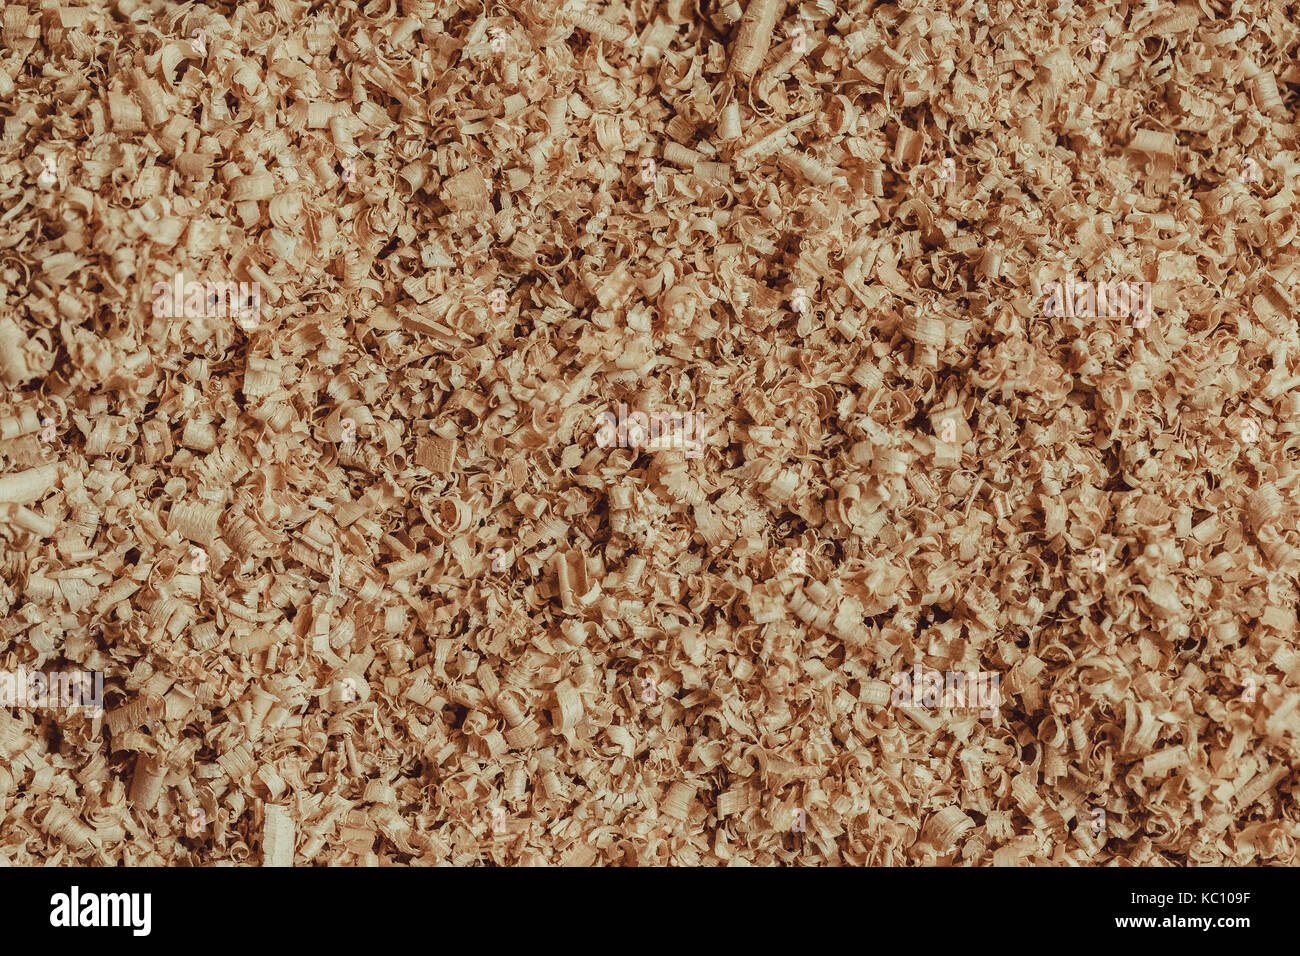 Pile of wood chips. Beautiful background of sawdust Stock Photo